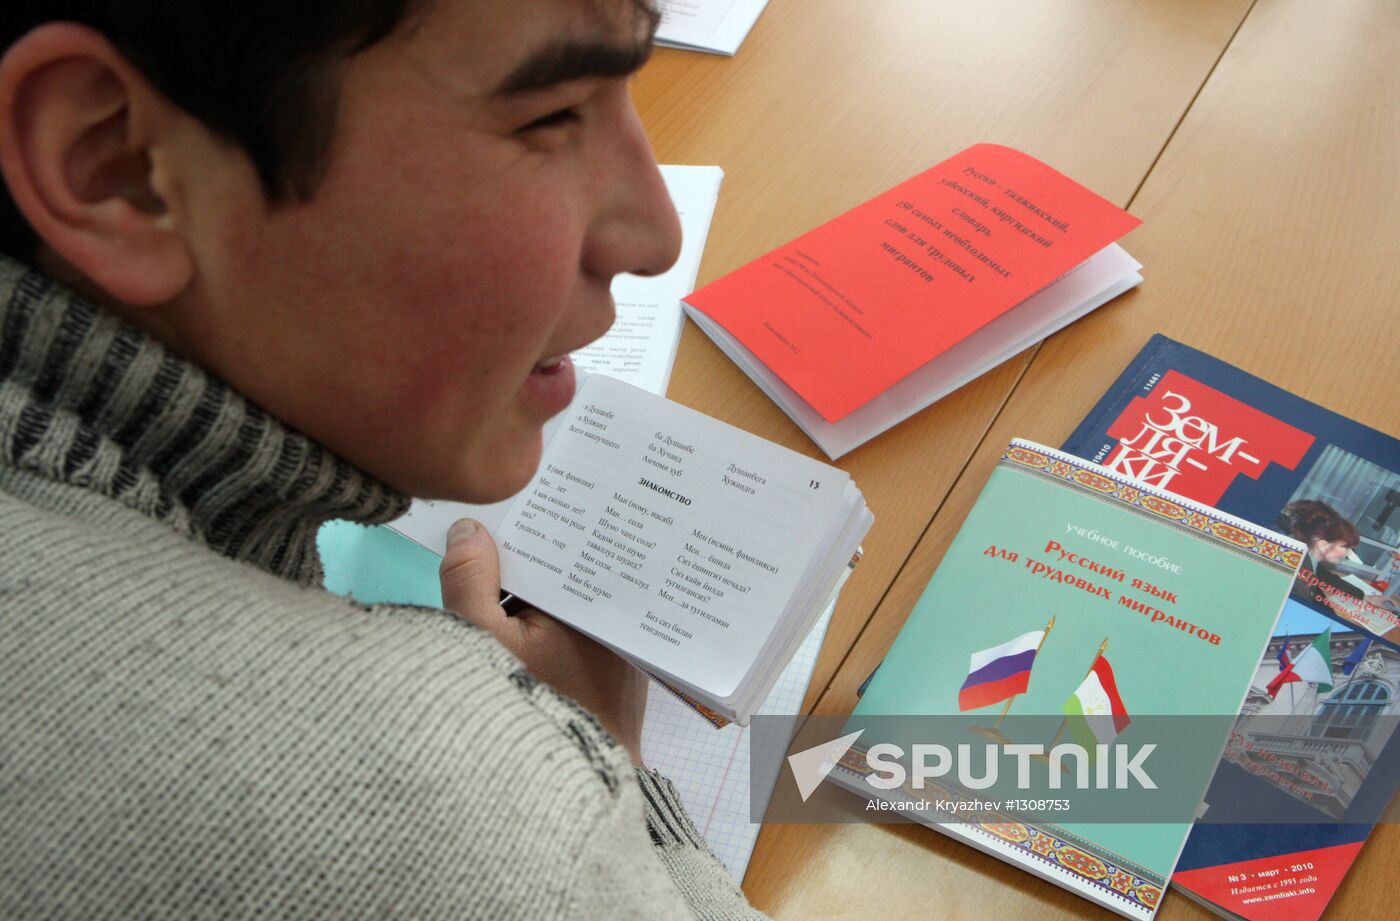 Russian language courses for migrants in Novosibirsk